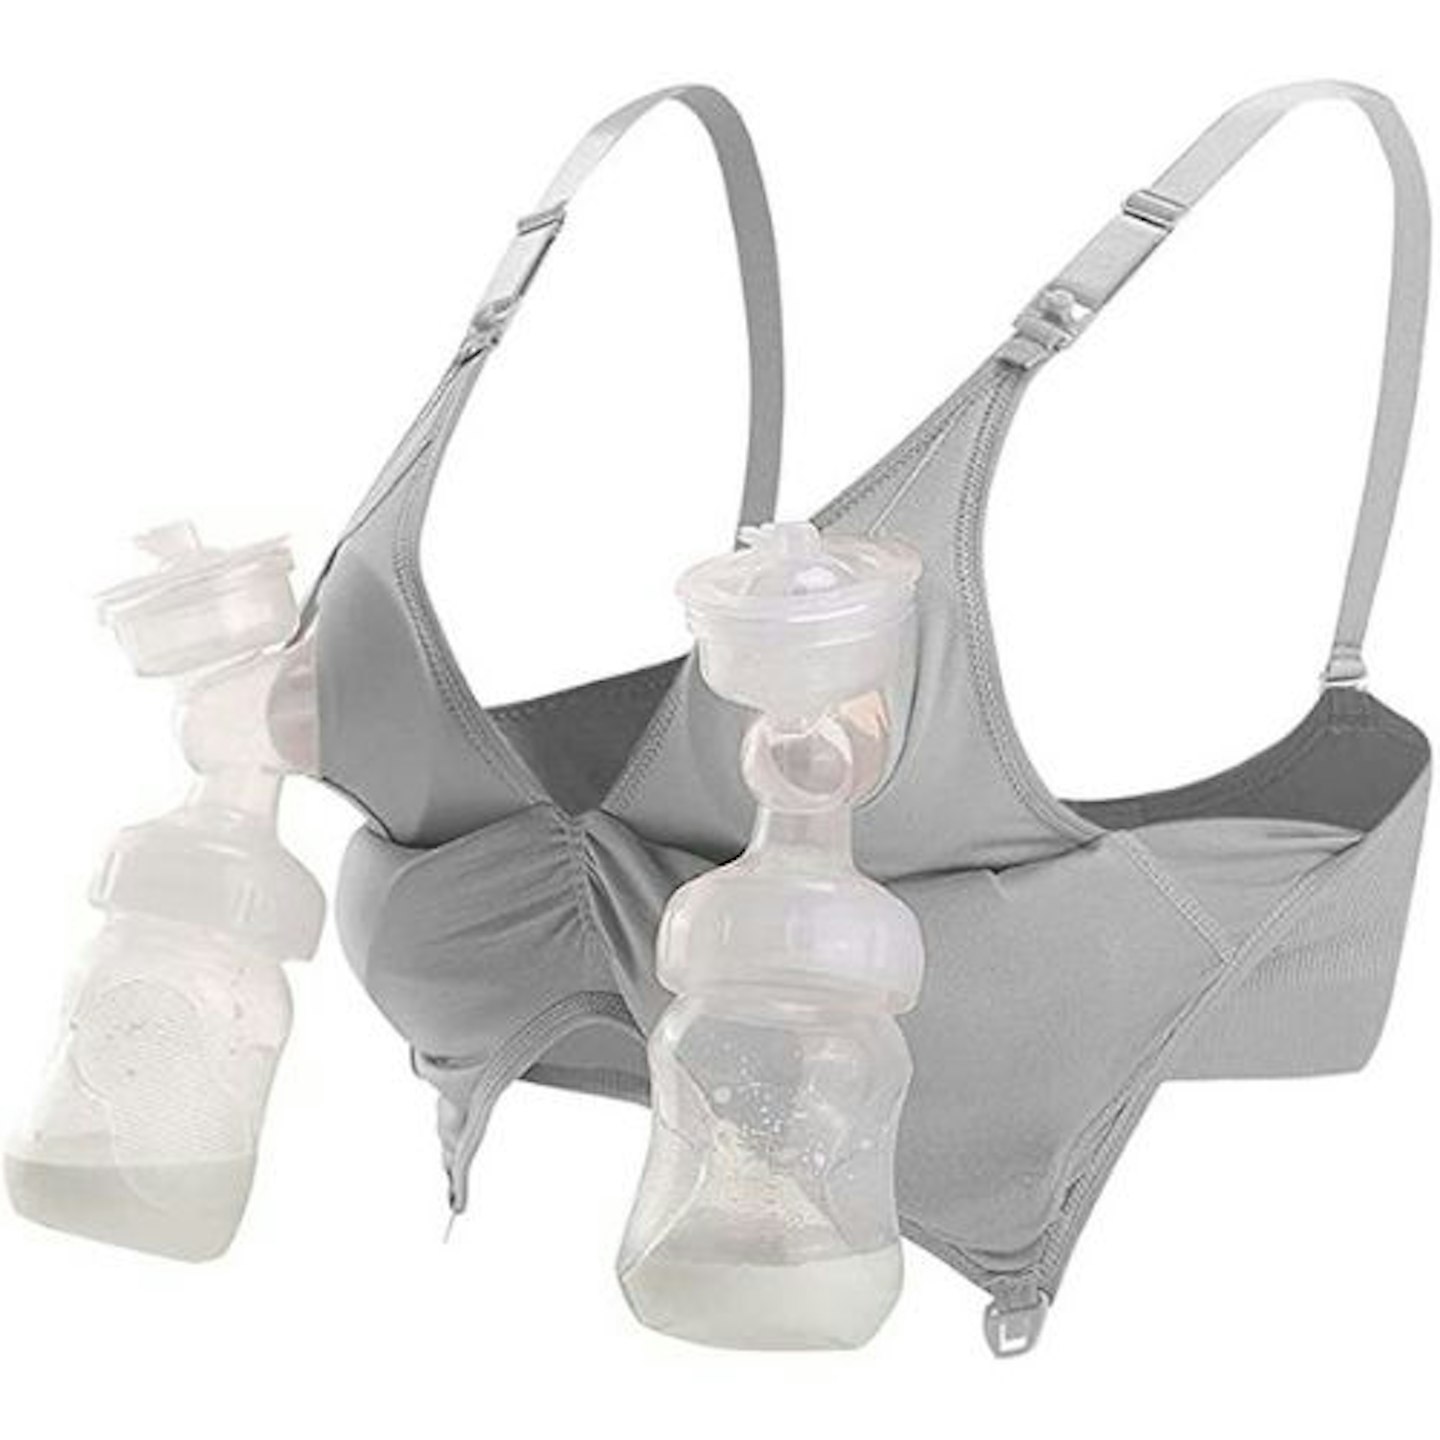 Best Bras for Wearable Breast Pumps And Cups — Genuine Lactation